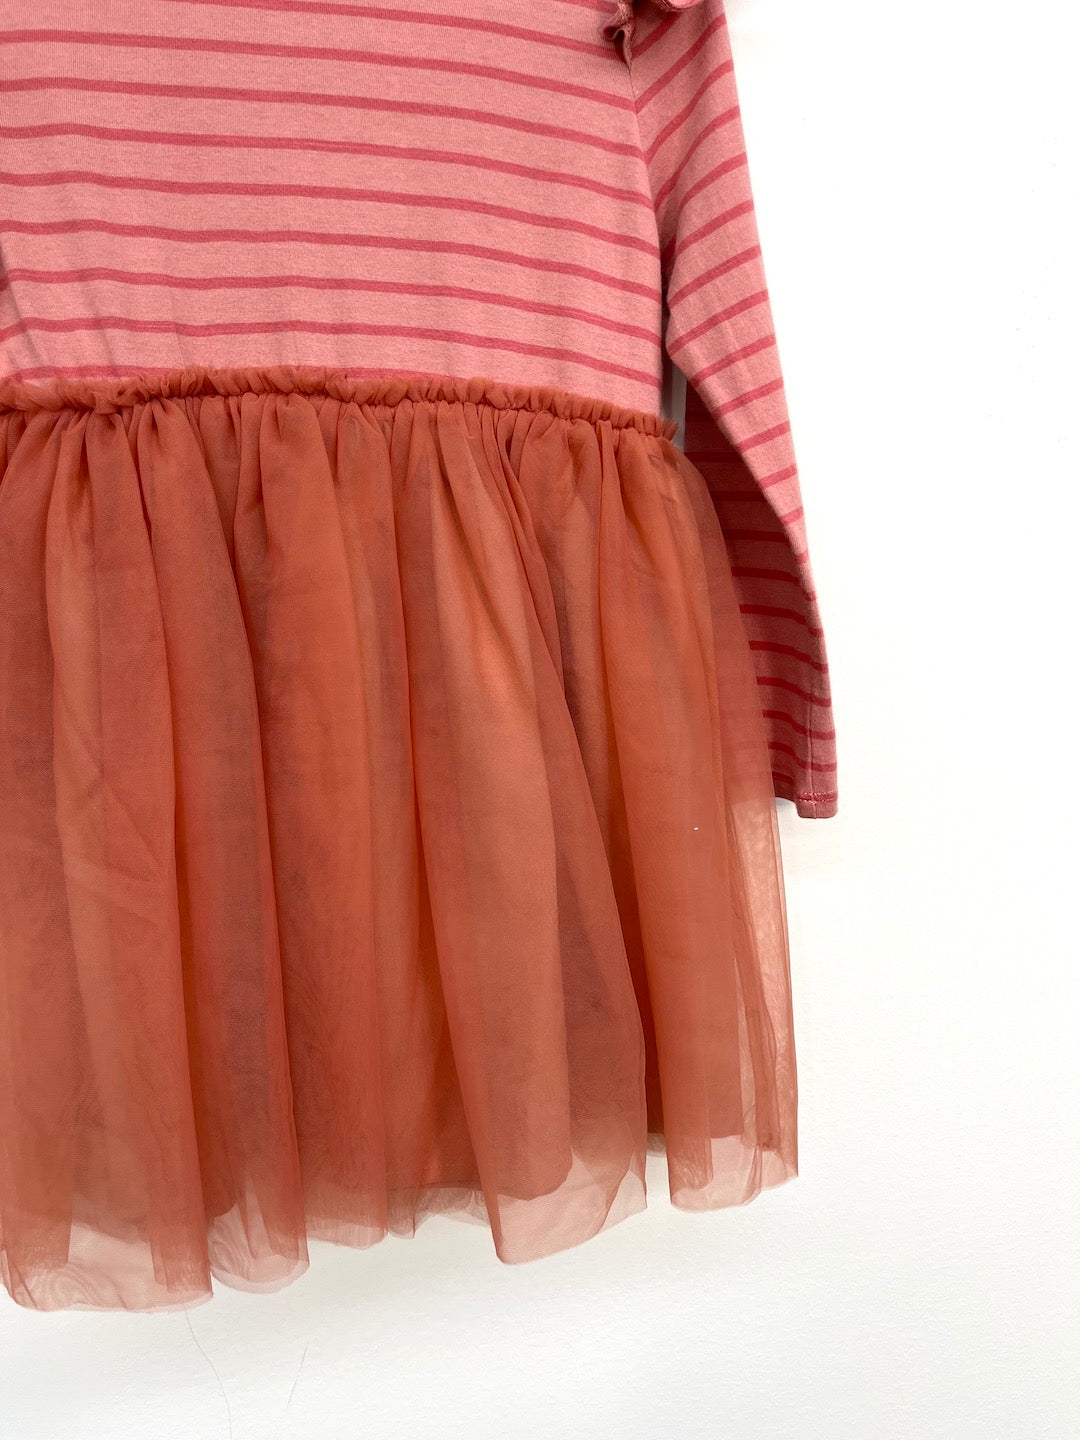 rise little earthling peachy pink dress 4T